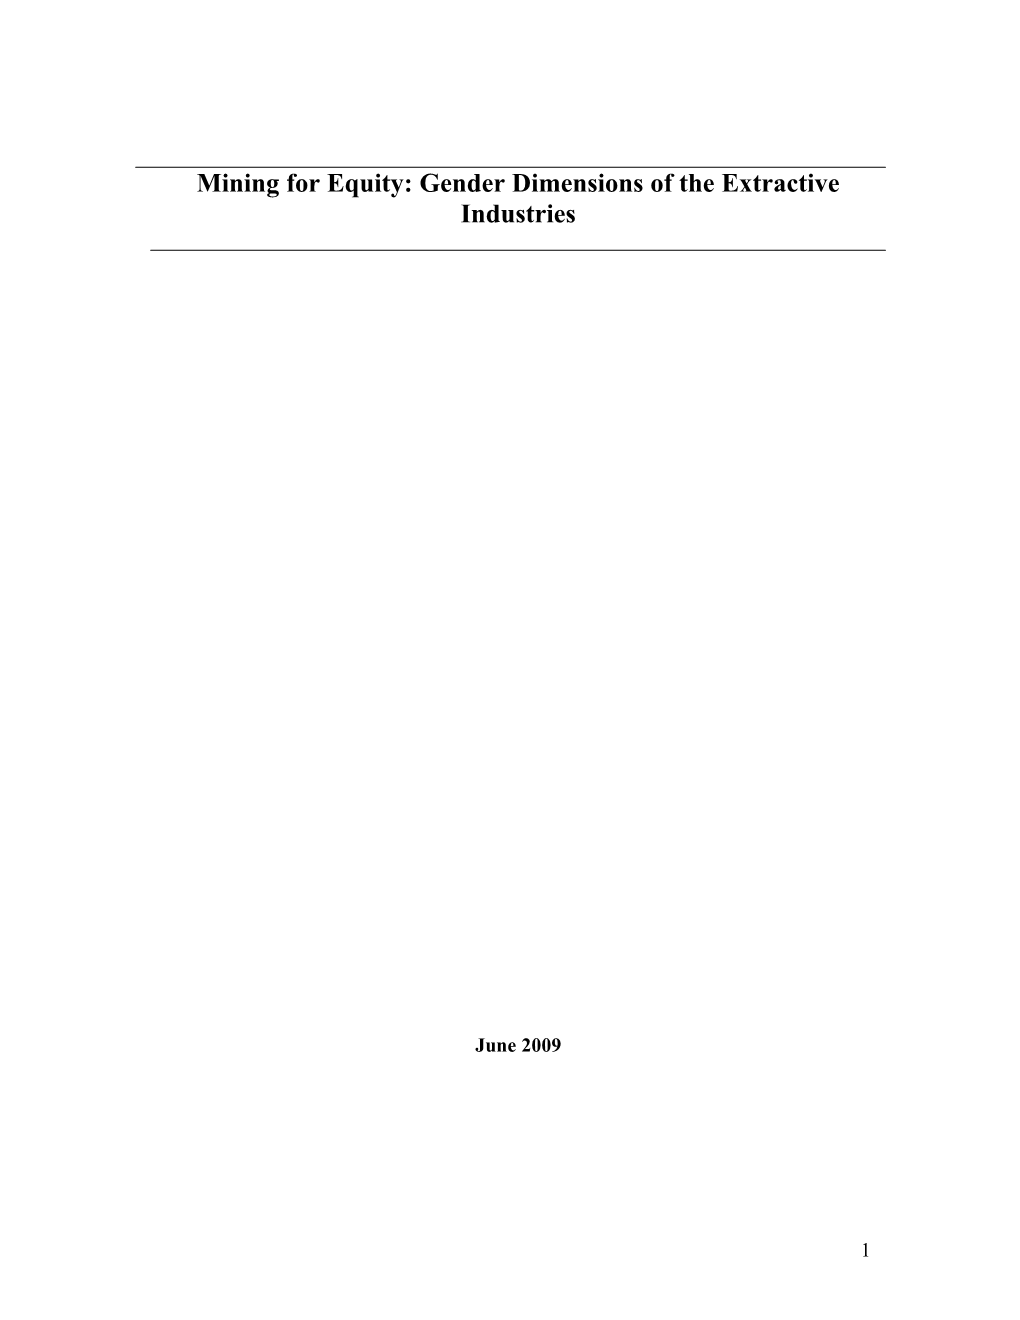 The Gender Dimensions of the Extractive Industries